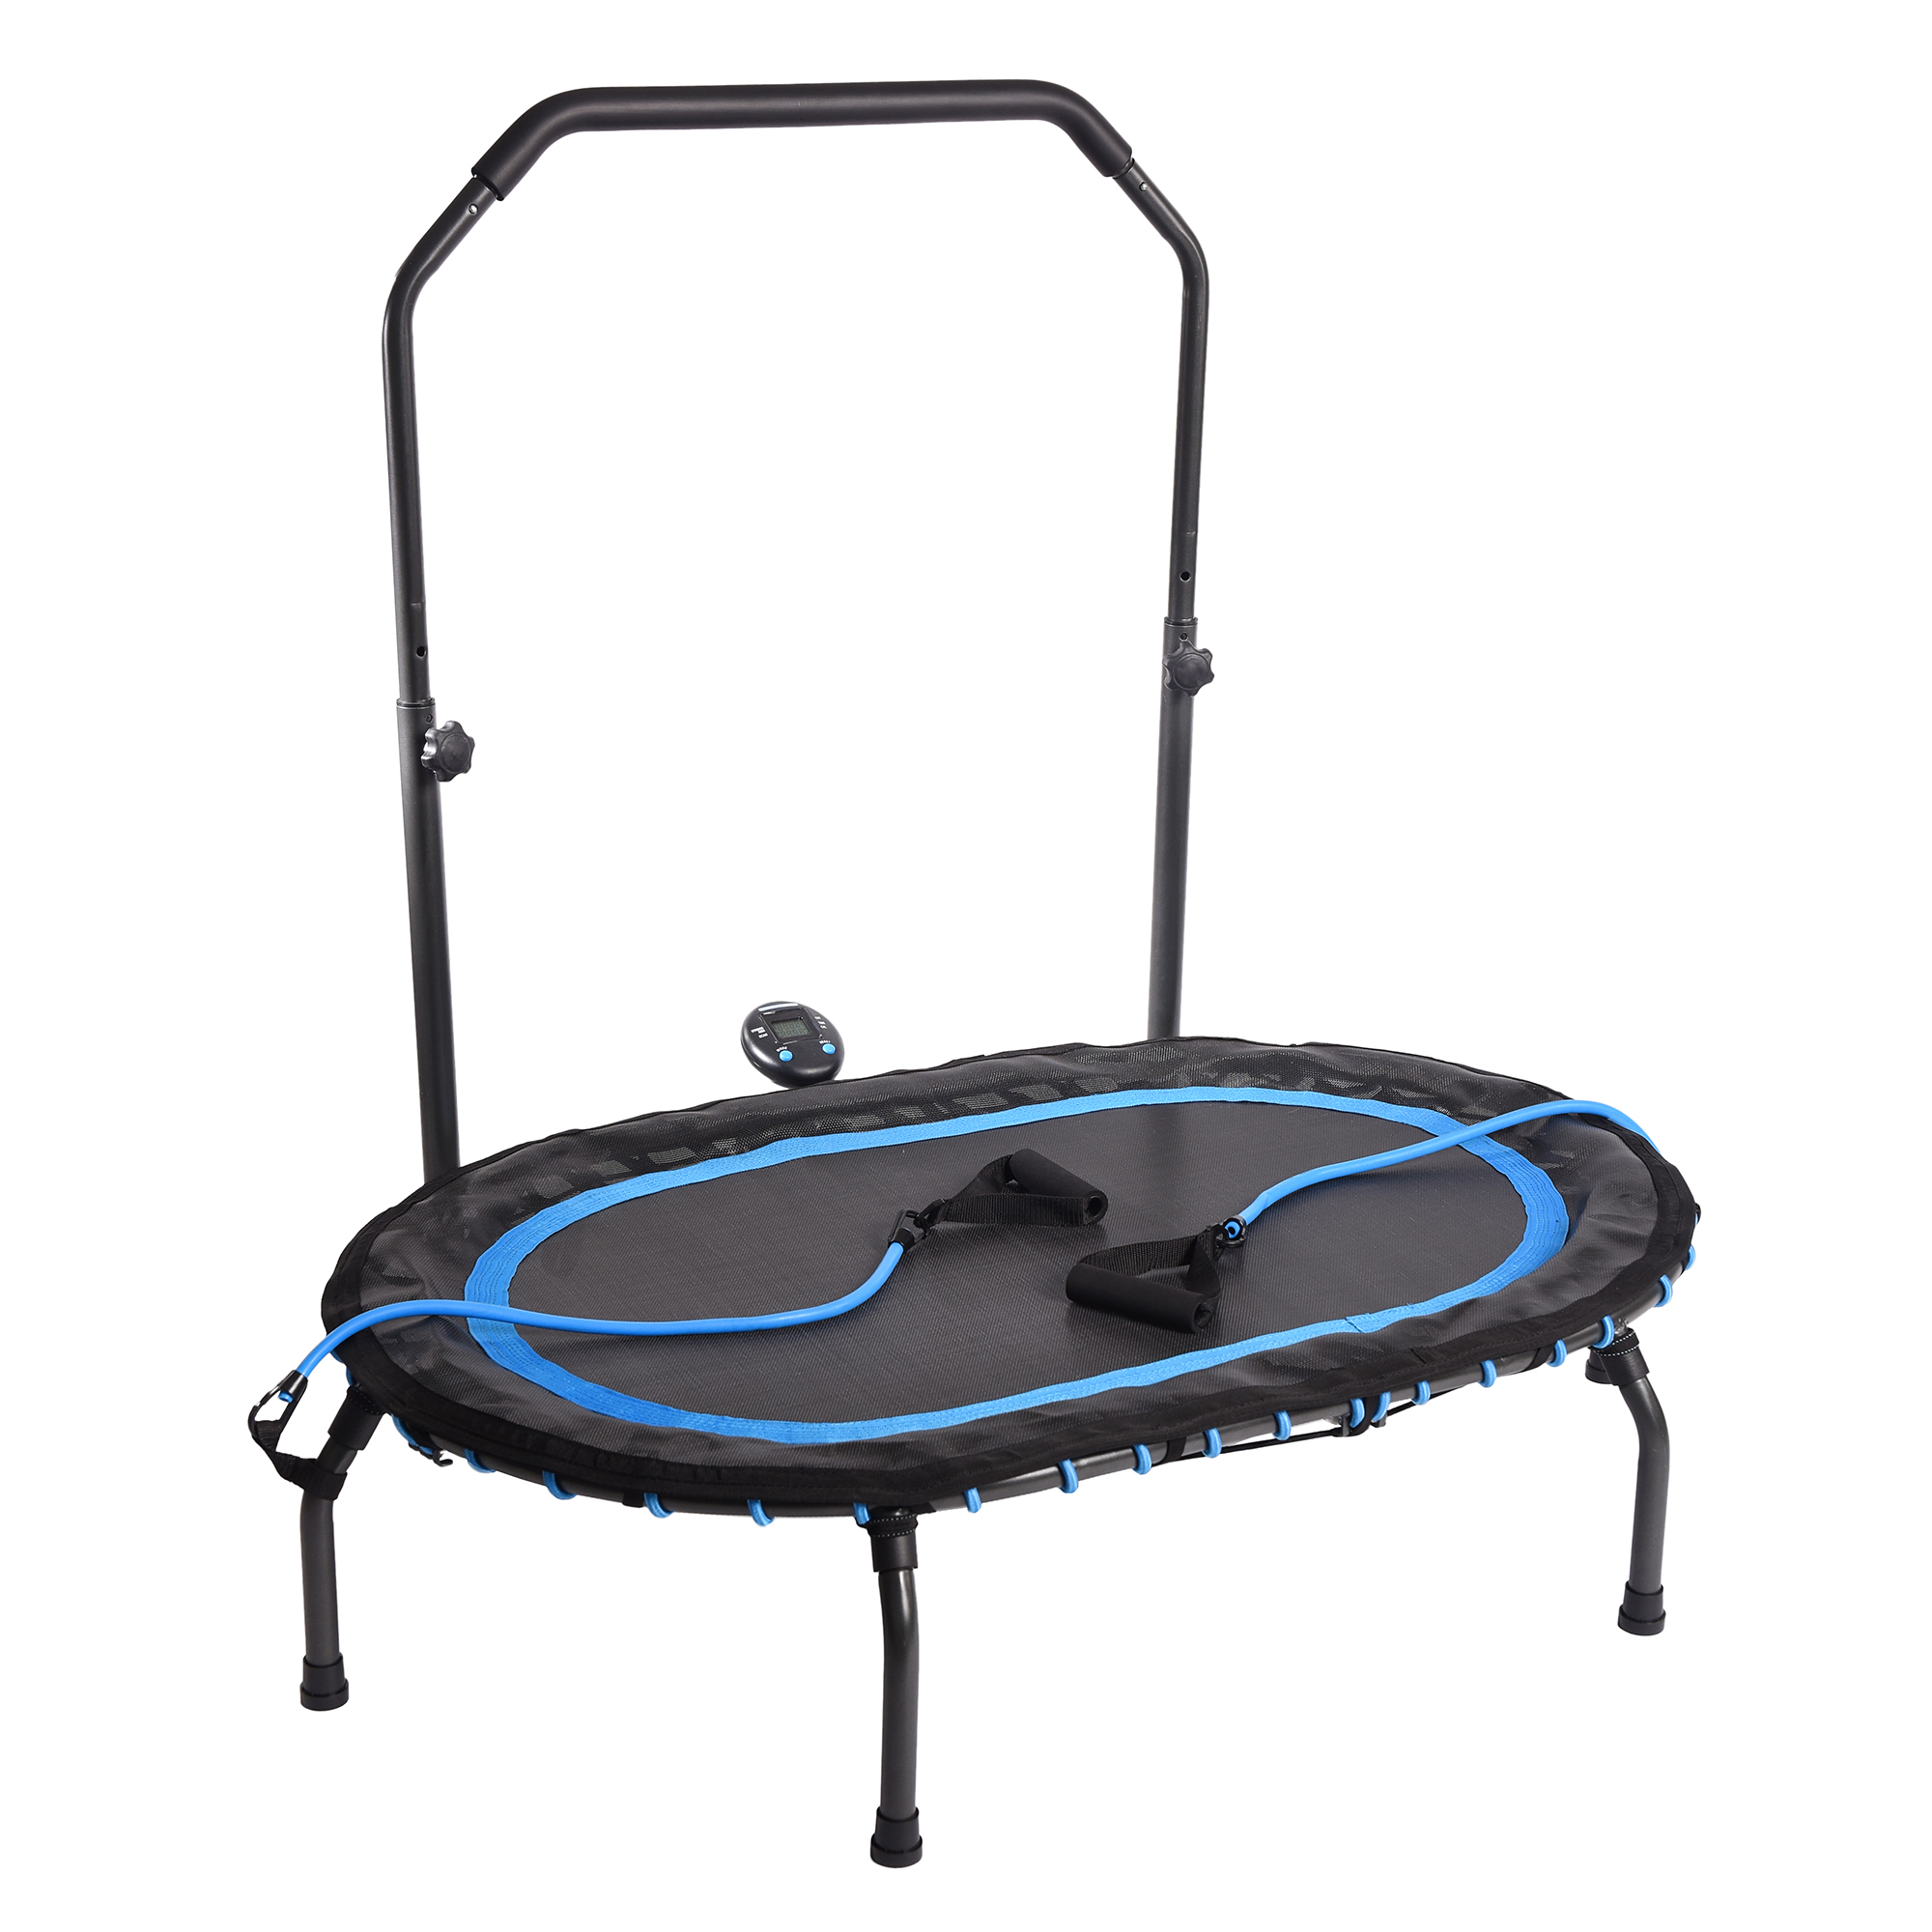 Stamina InTone Oval Fitness Rebounder Trampoline for Cardio with Handlebars - image 1 of 9